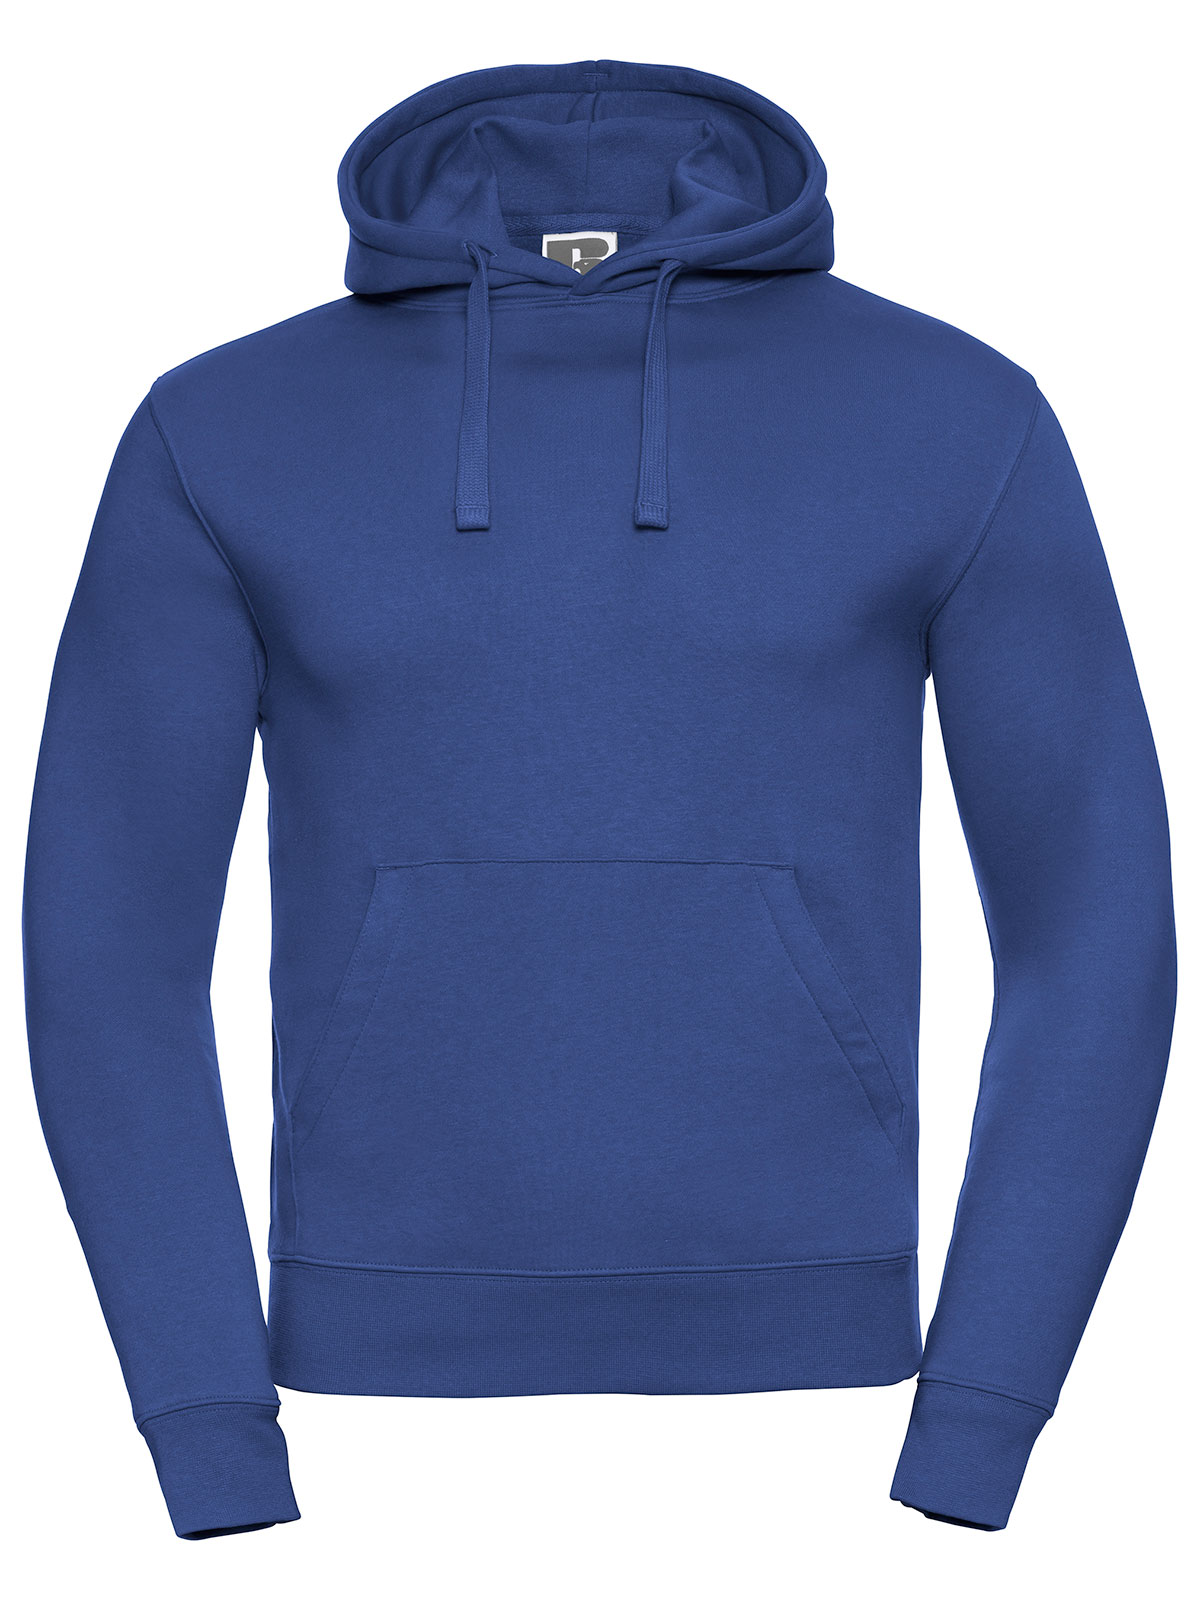 mens-authentic-hooded-sweat-bright-royal.webp